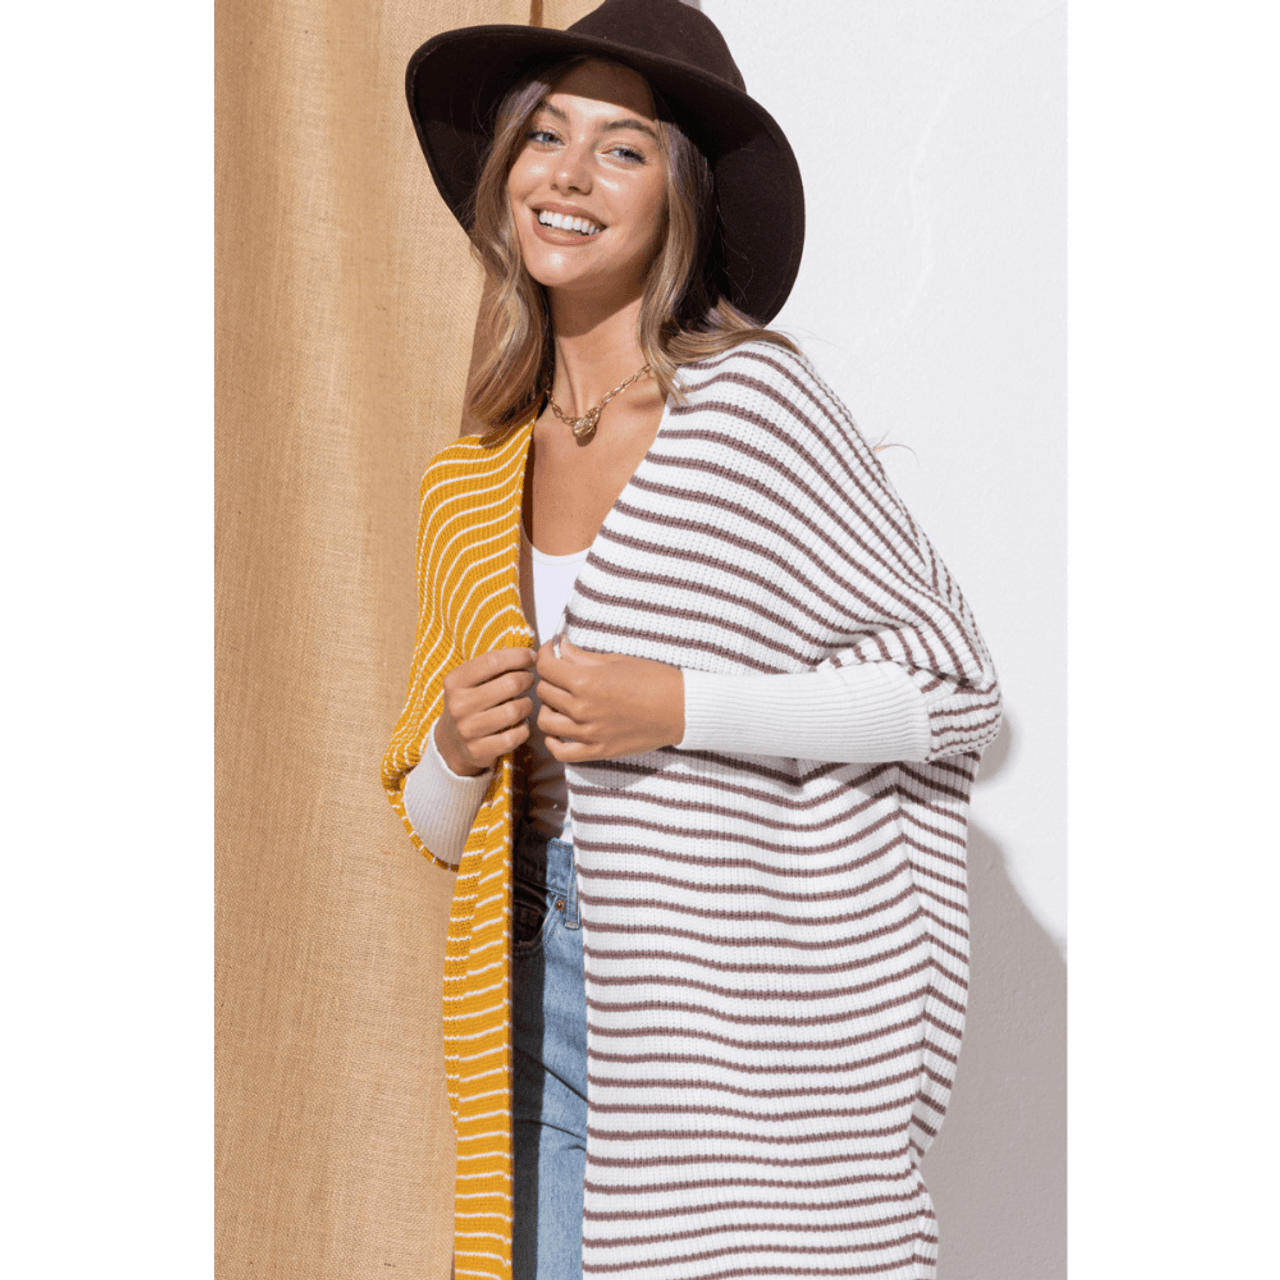 Cozy Co Half and Half Striped Knit Dolman Batwing Cardigan Mustard Yellow White Brown